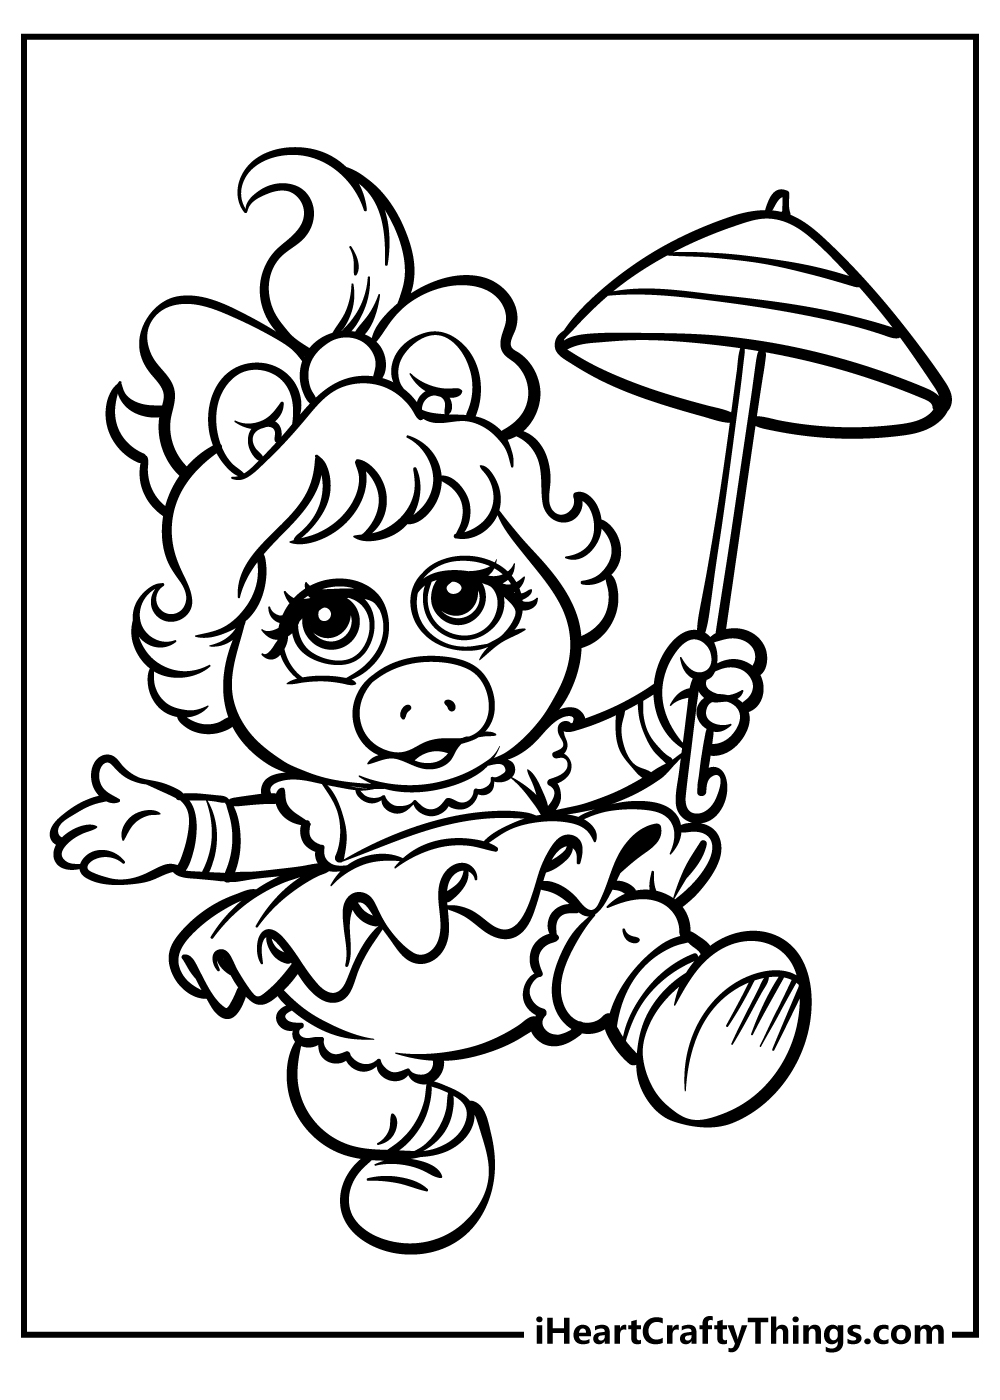 Muppet Babies Coloring Pages for kids free download